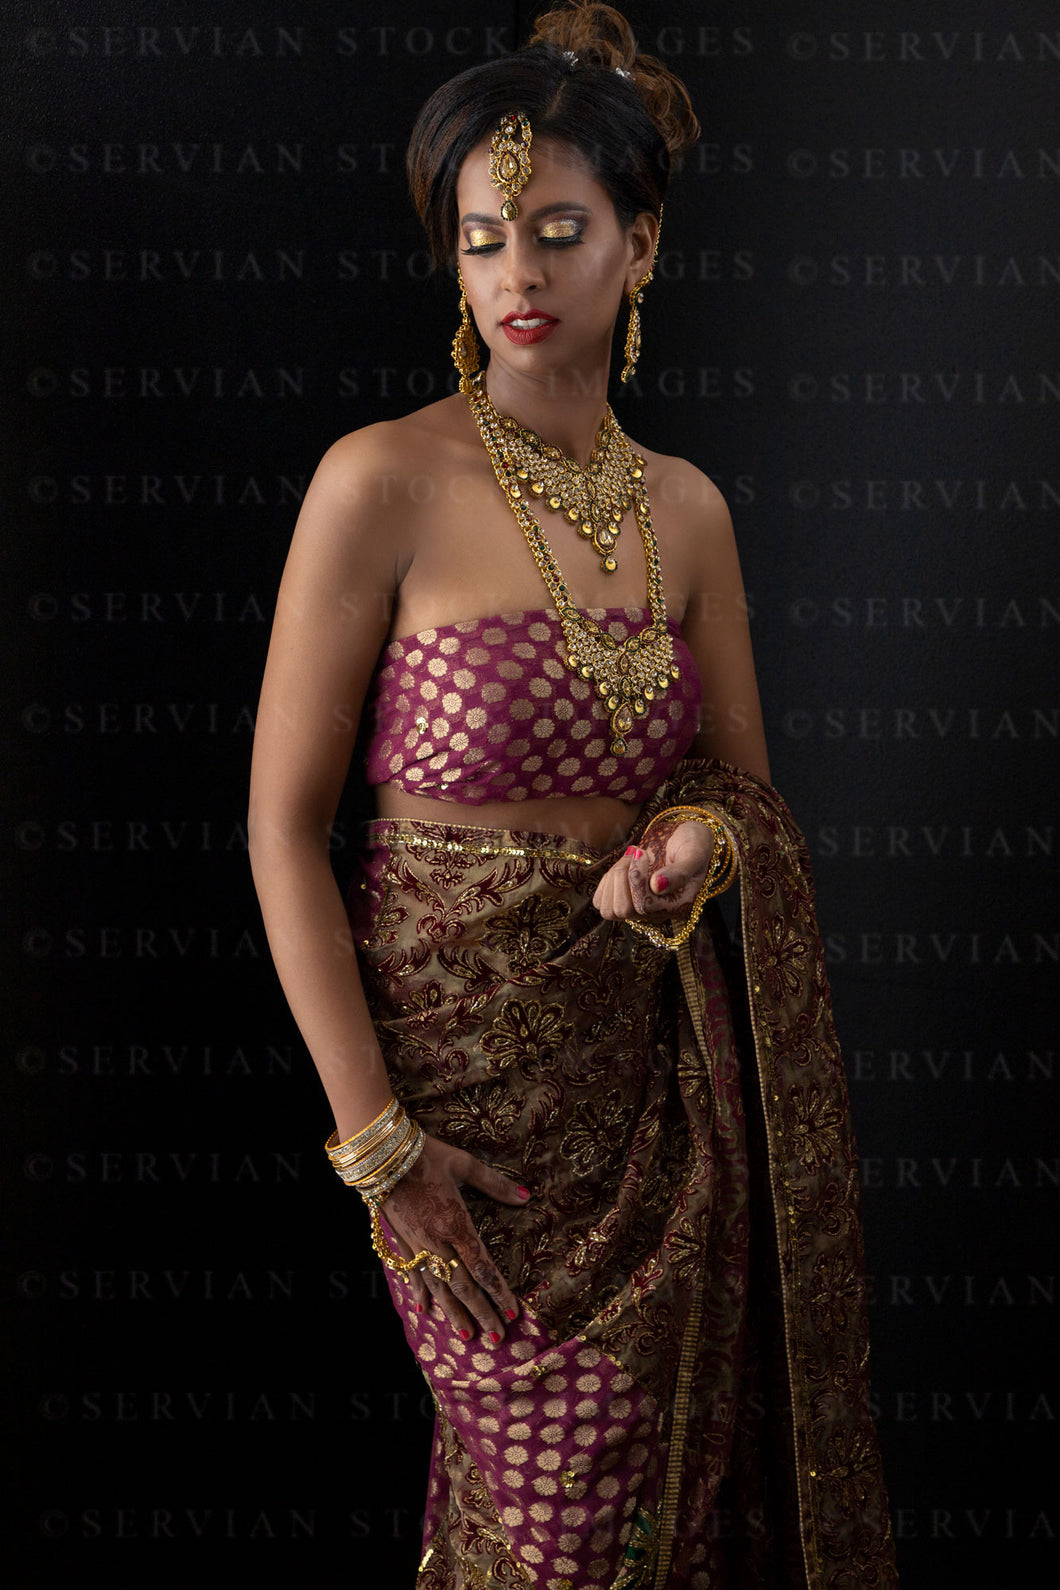 Woman wearing a sari and gold jewellery against a black backdrop (Shelaila 4338)